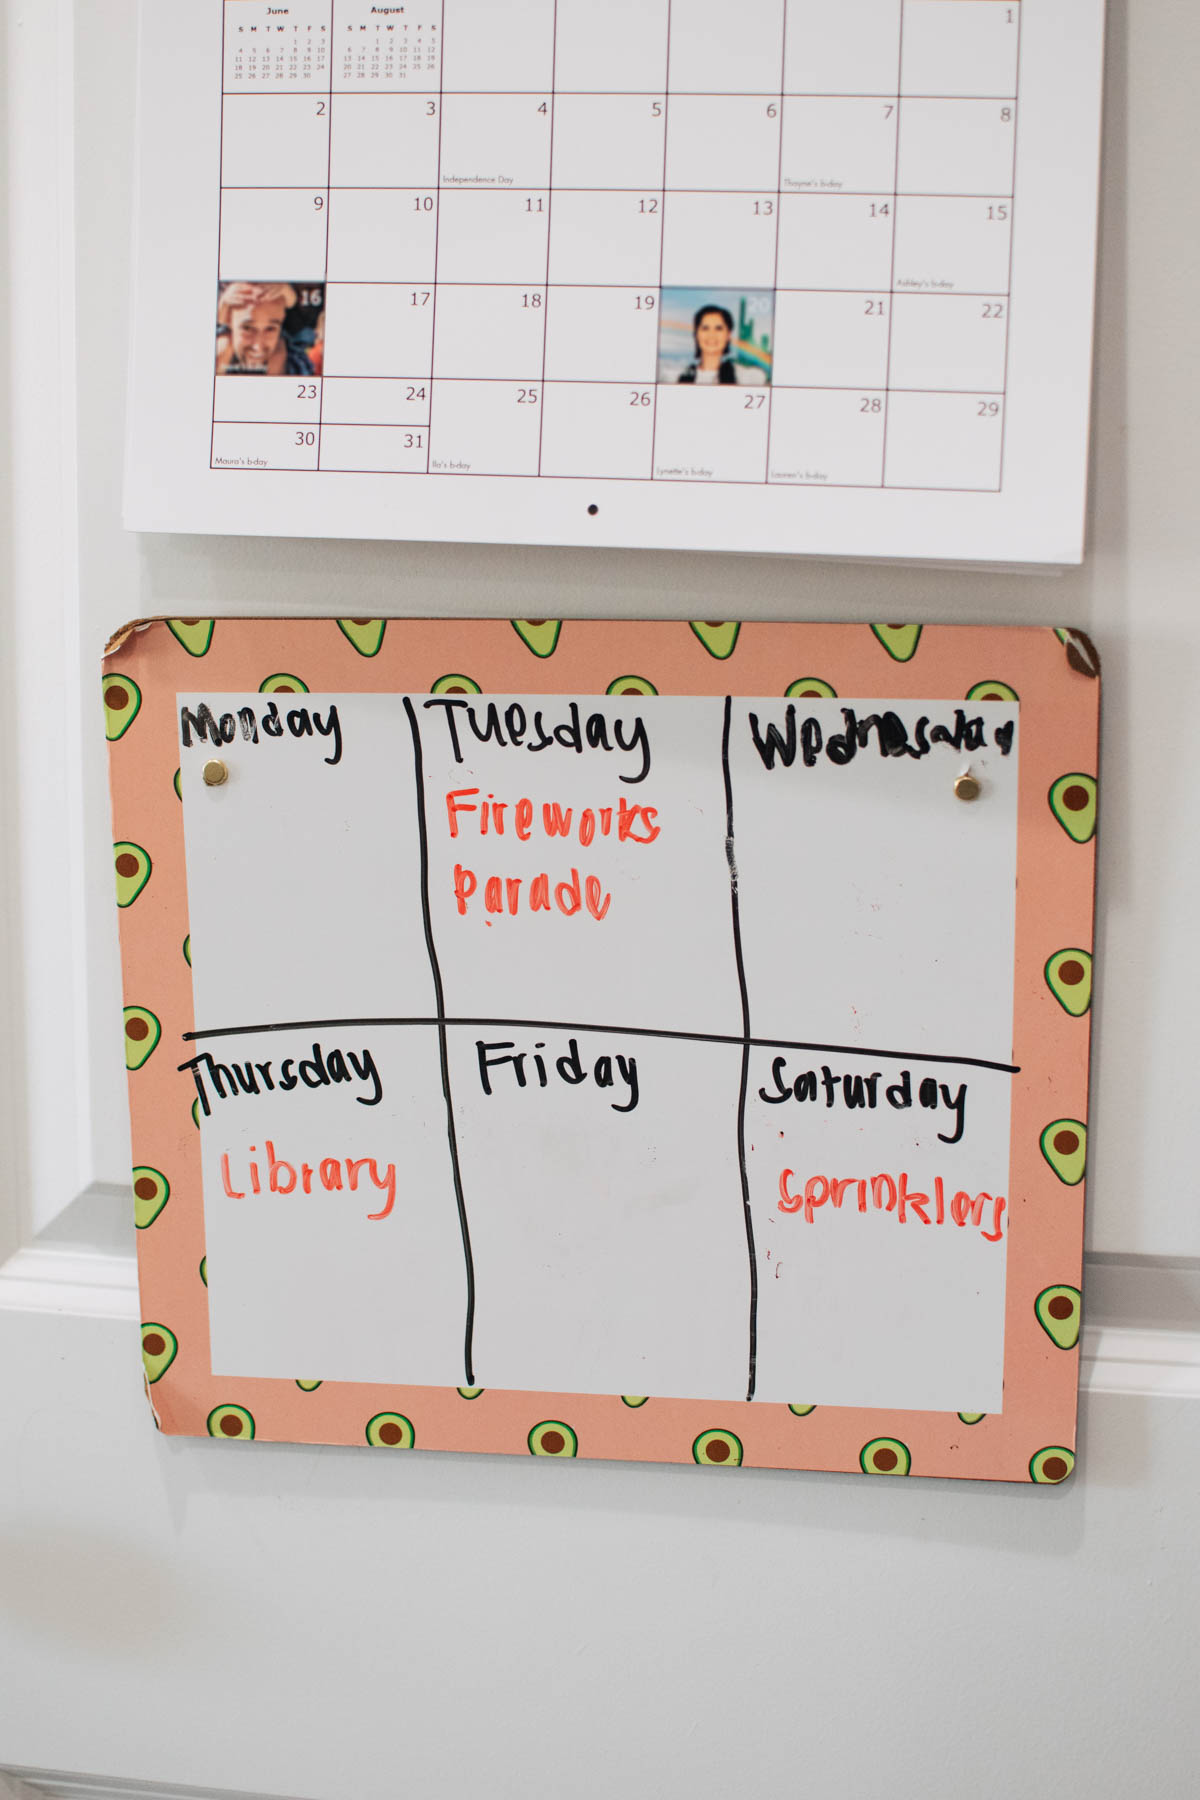 White board with squares drawn and days of the week written along with summer activities in a few squares.